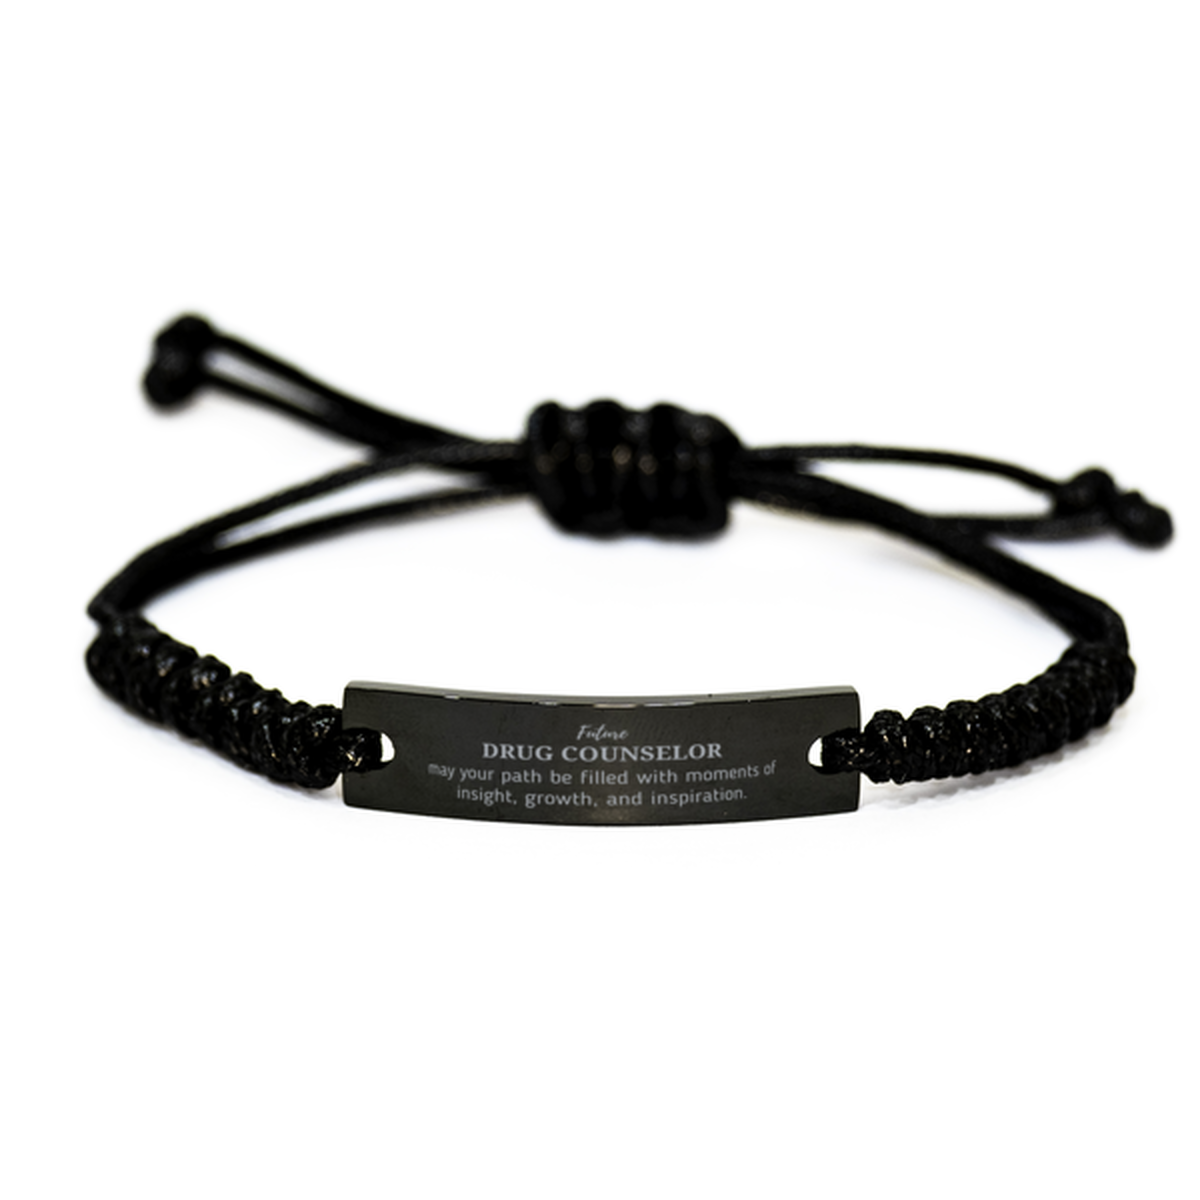 Future Drug Counselor Gifts, May your path be filled with moments of insight, Graduation Gifts for New Drug Counselor, Christmas Unique Black Rope Bracelet For Men, Women, Friends